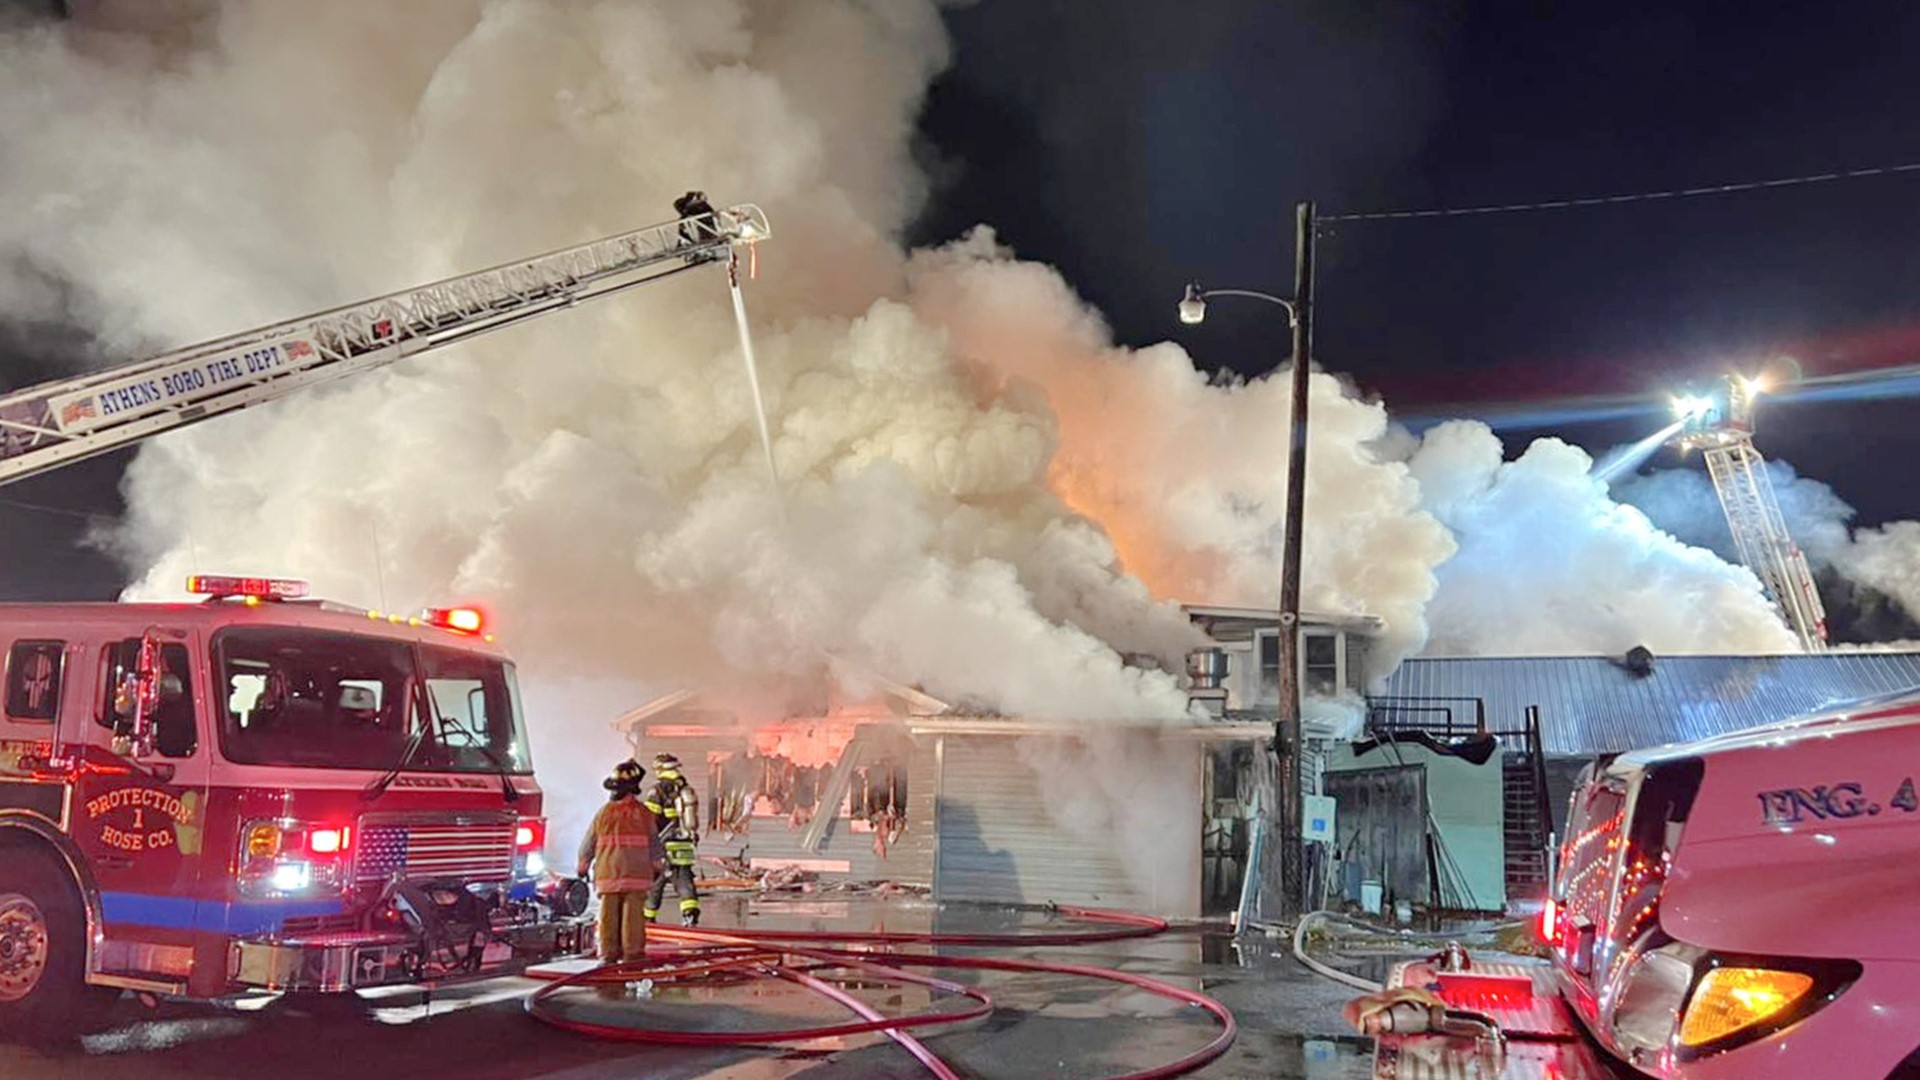 A family restaurant near Sayre was destroyed by fire Tuesday night.